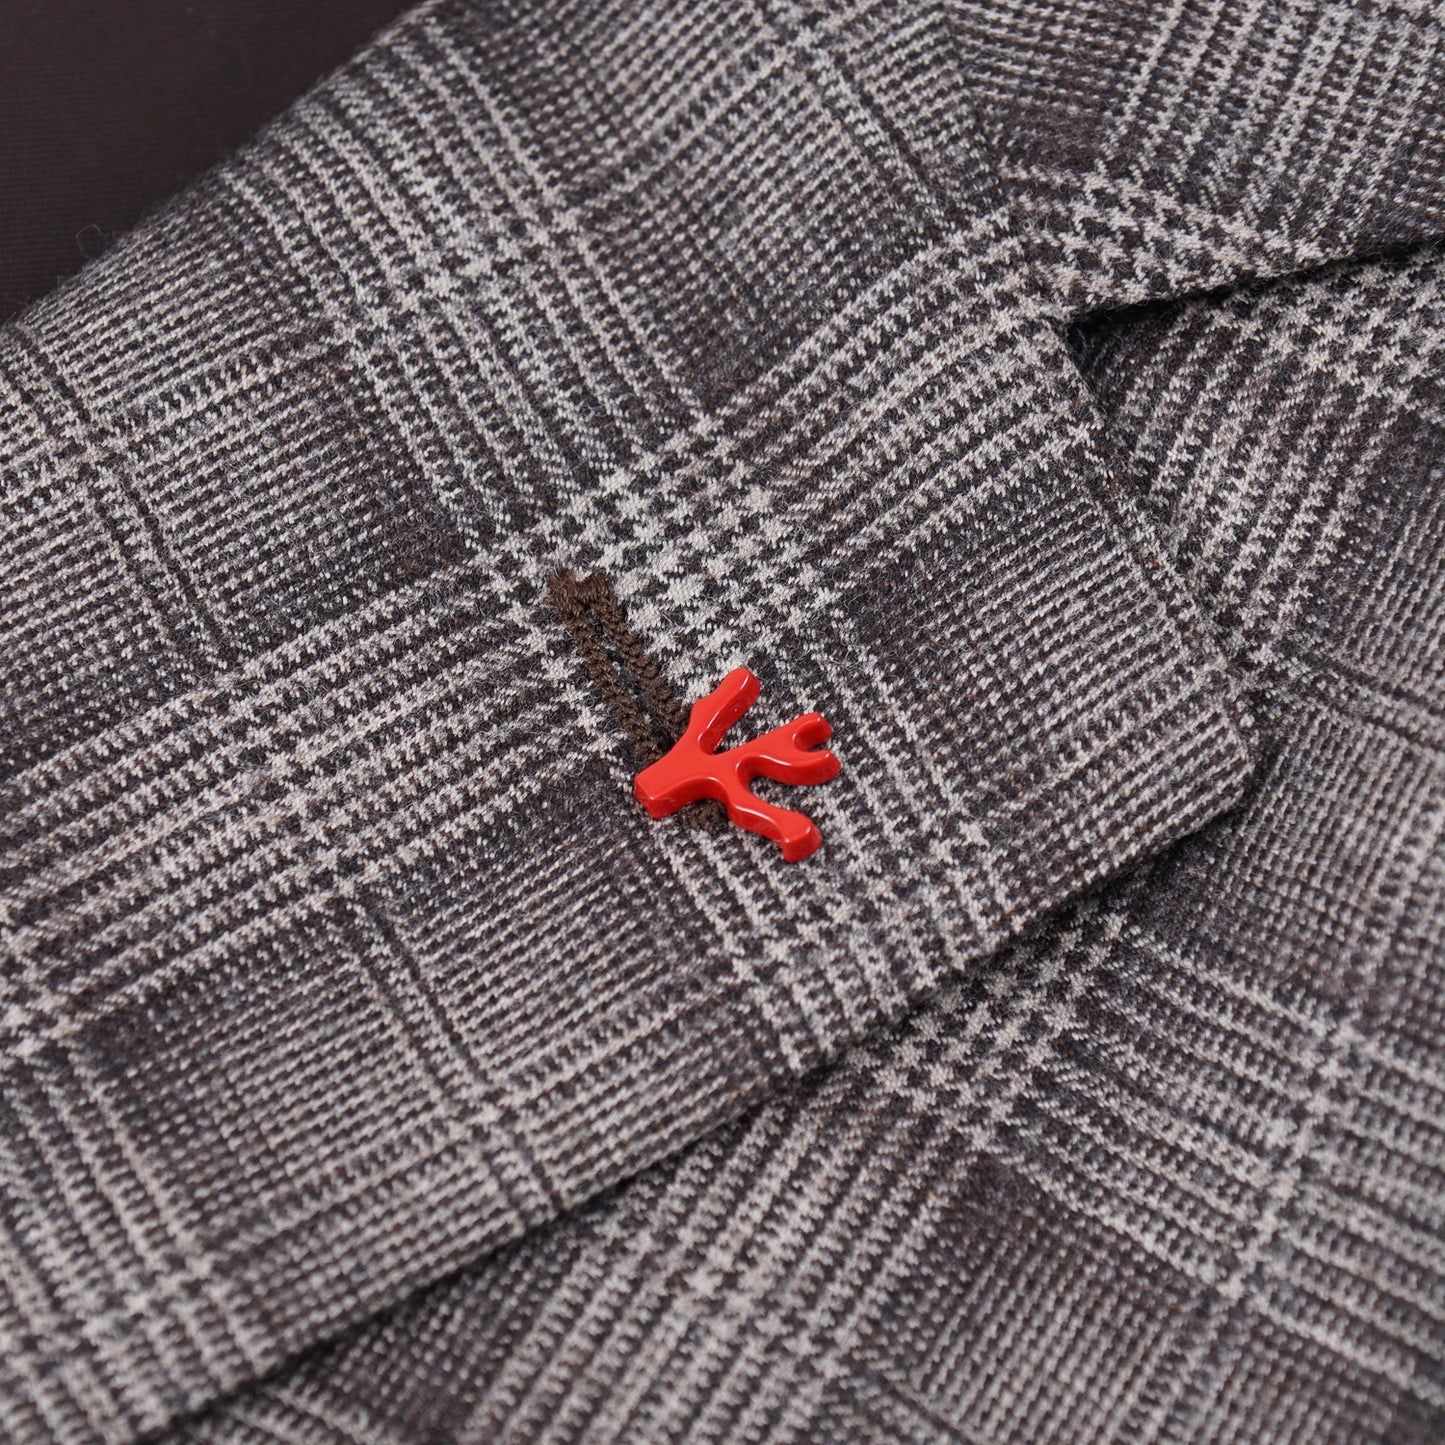 Isaia Slim-Fit Shadow Check Wool Suit - Top Shelf Apparel